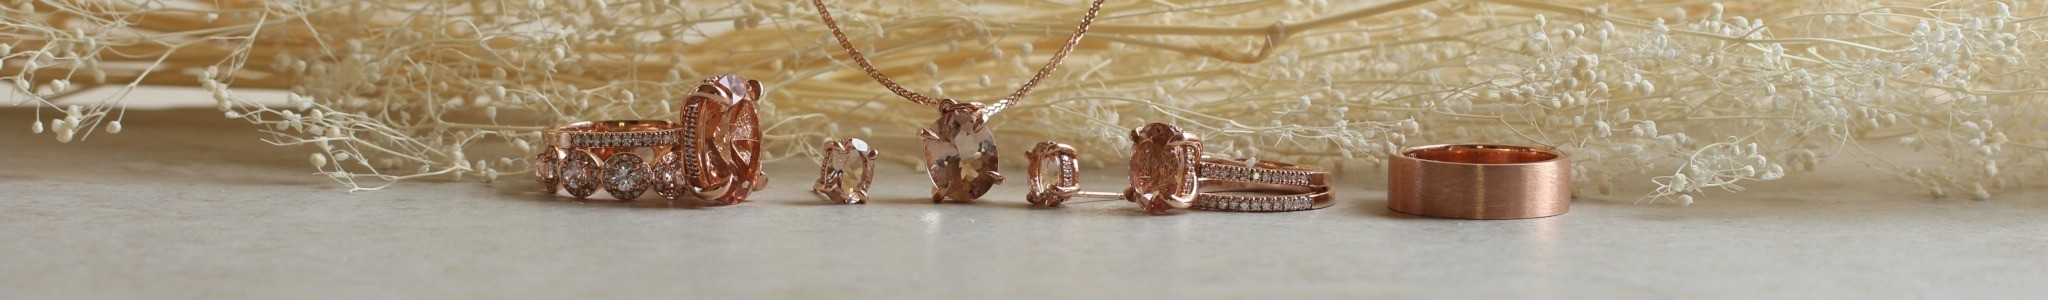 Beverly Morganite Product Line Image